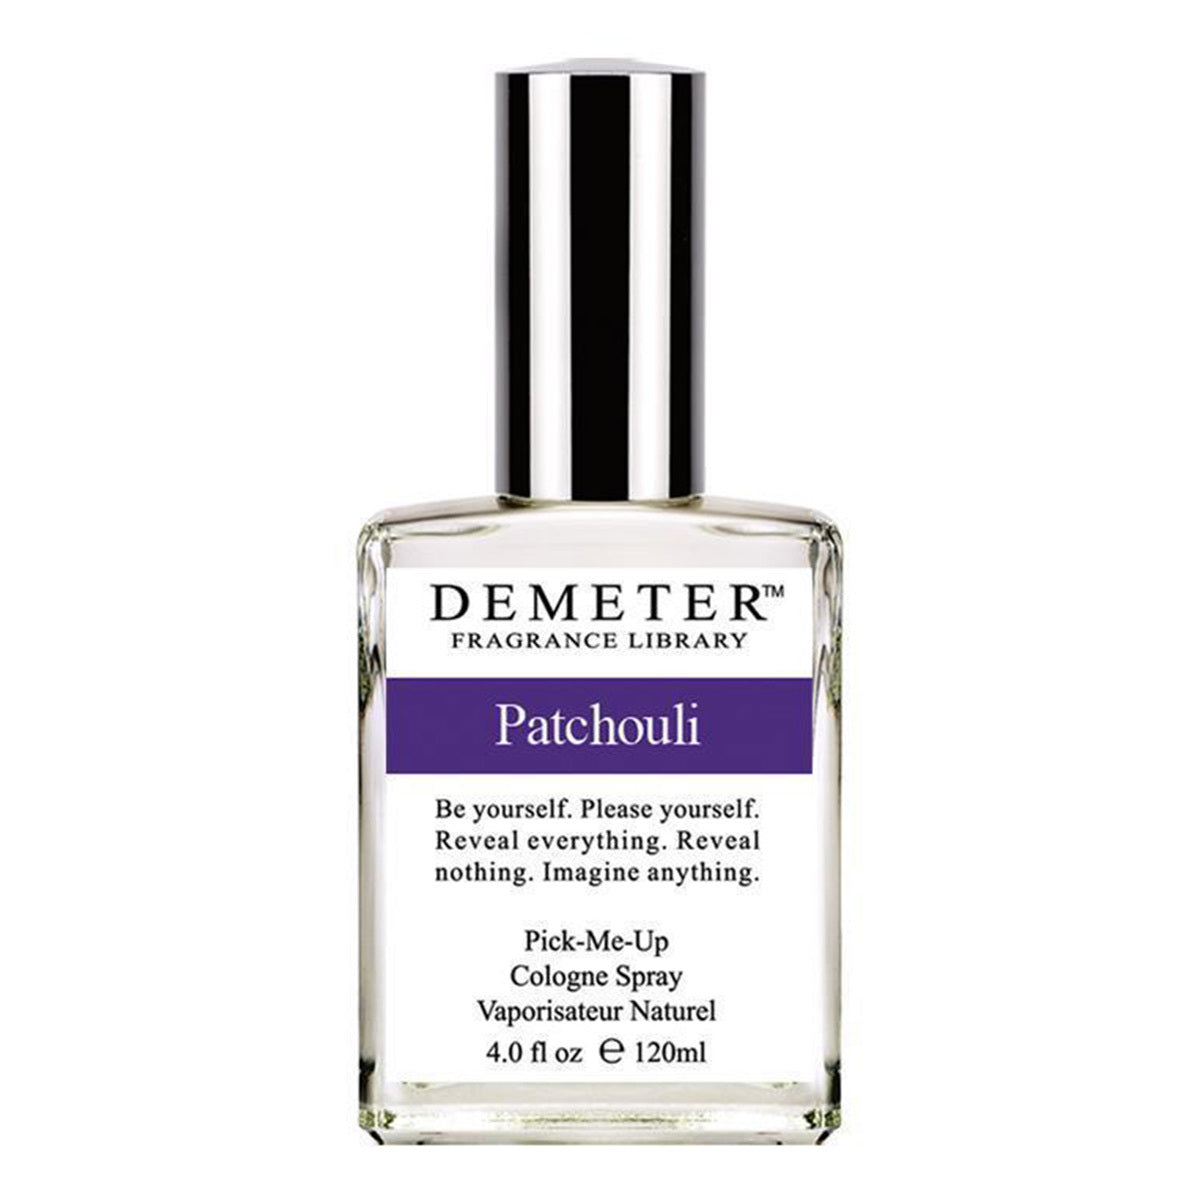 Primary image of Patchouli Cologne Spray